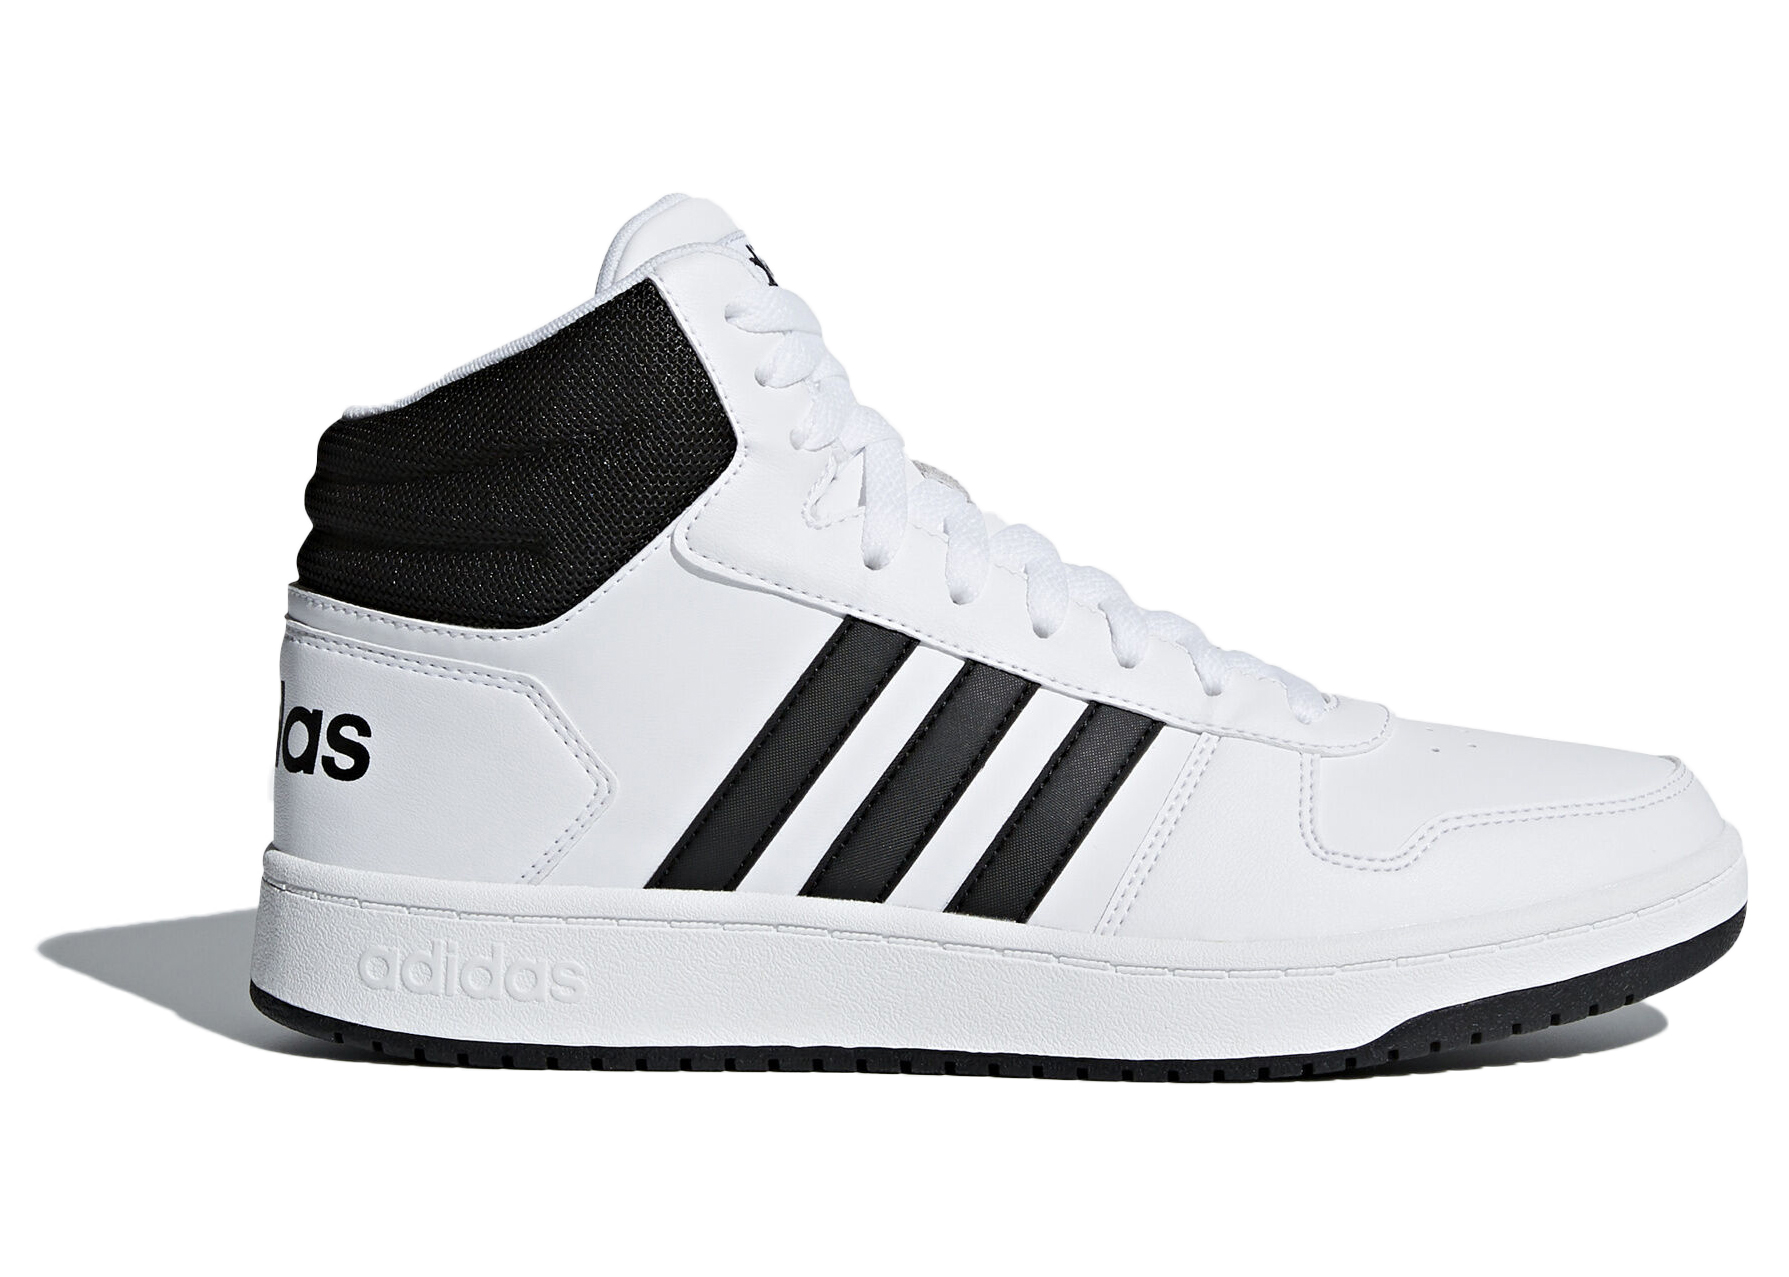 adidas hoops 2.0 off white